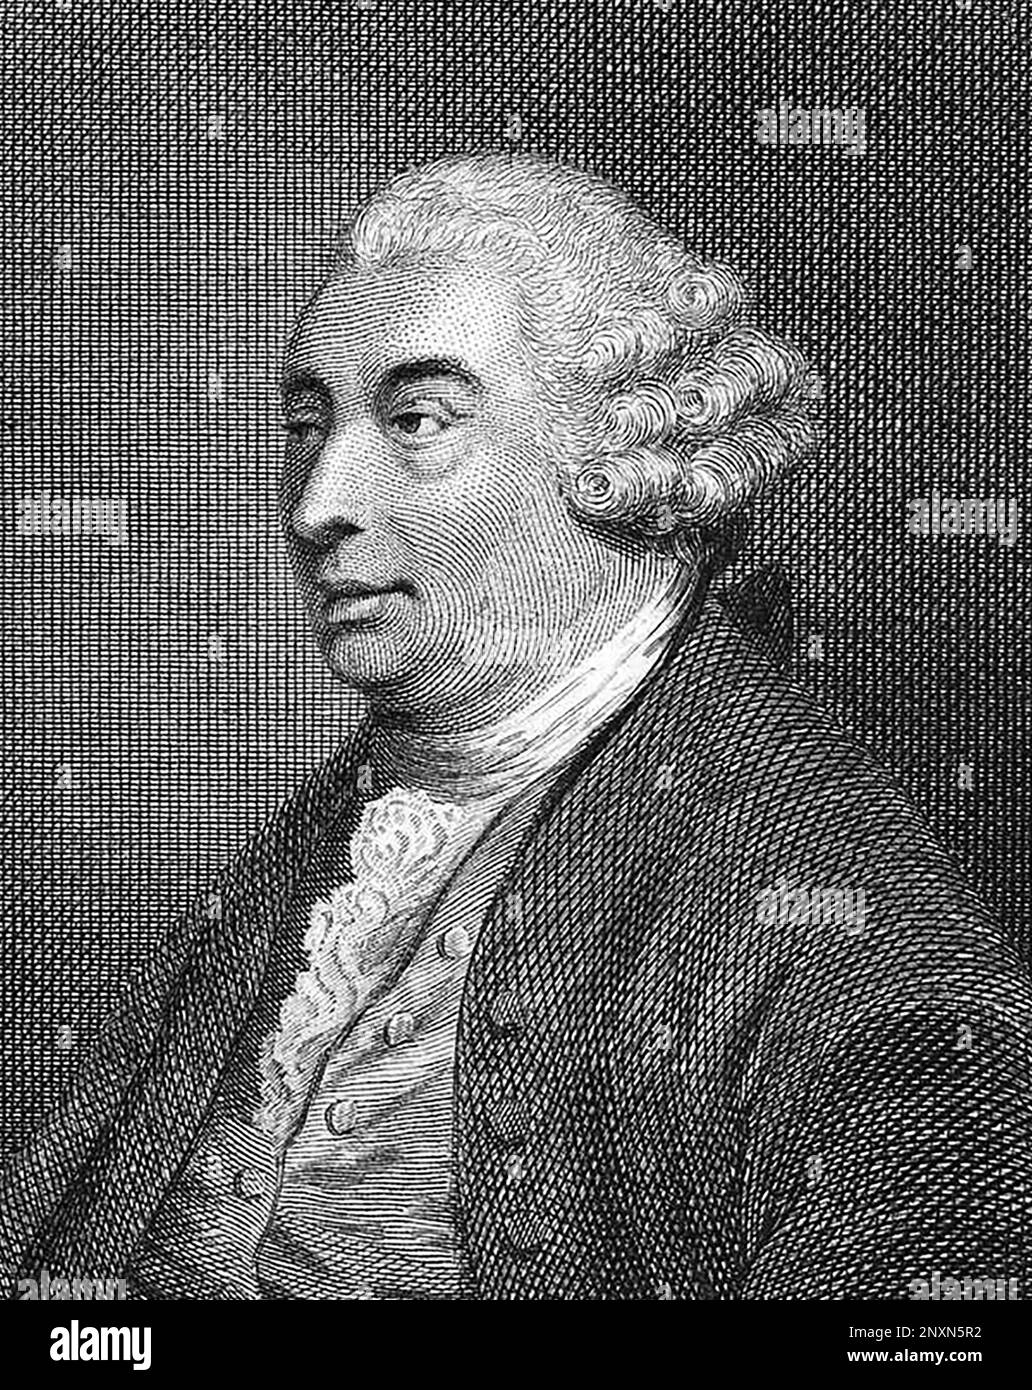 David Hume (1711-1776), Scottish Enlightenment philosopher, historian, and economist, best known today for his highly influential system of philosophical empiricism, skepticism, and naturalism. Undated print by Joseph Collyer, (1748-1827) after Thomas Stothard (1755-1834). Stock Photo